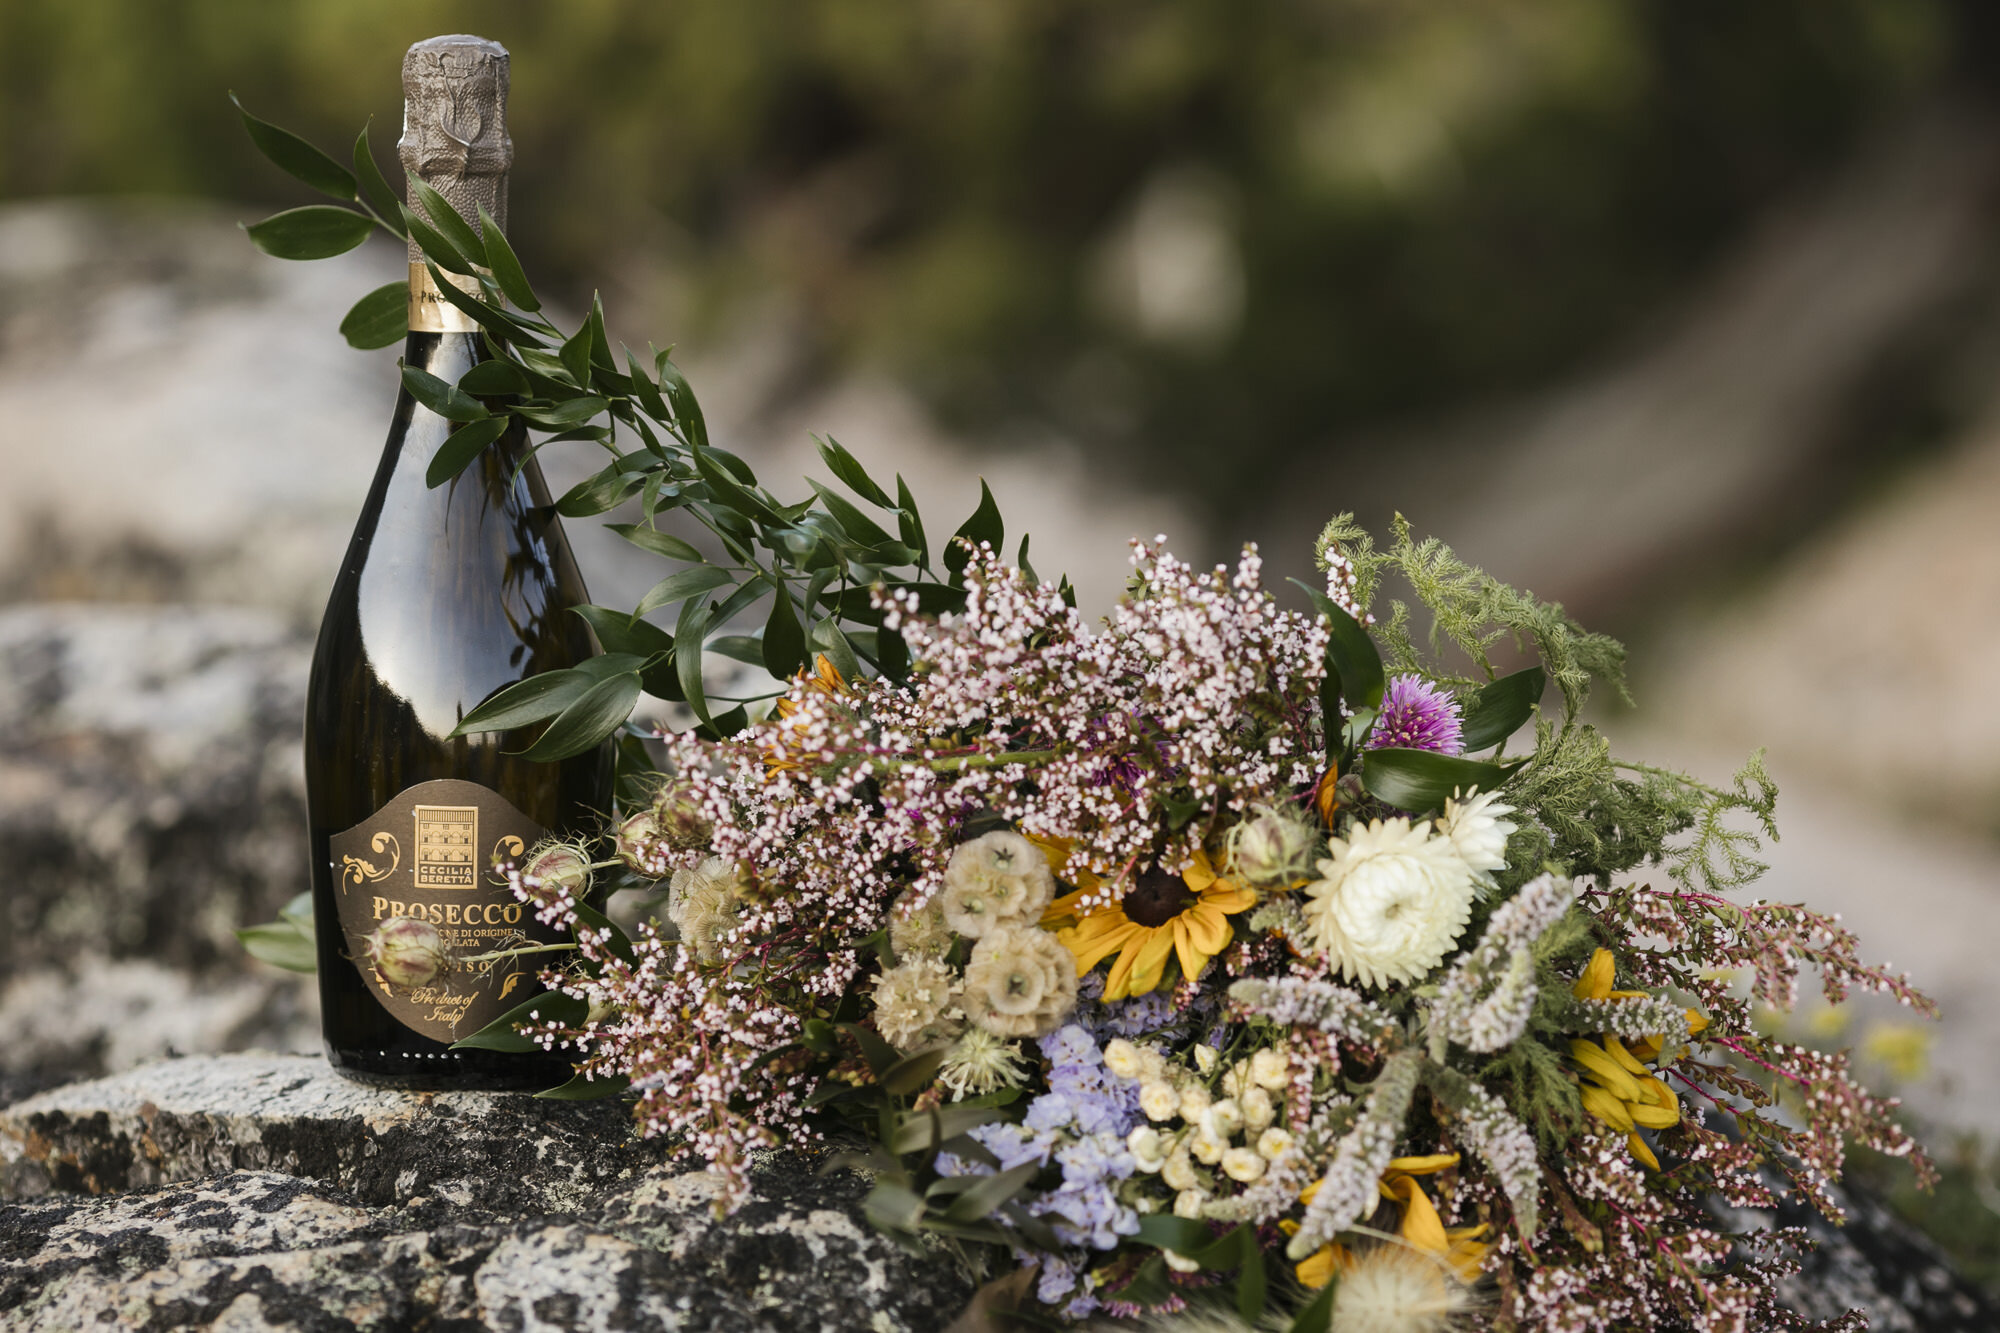 Bottle of prosecco next to bride's bouquet for backpacking elopement